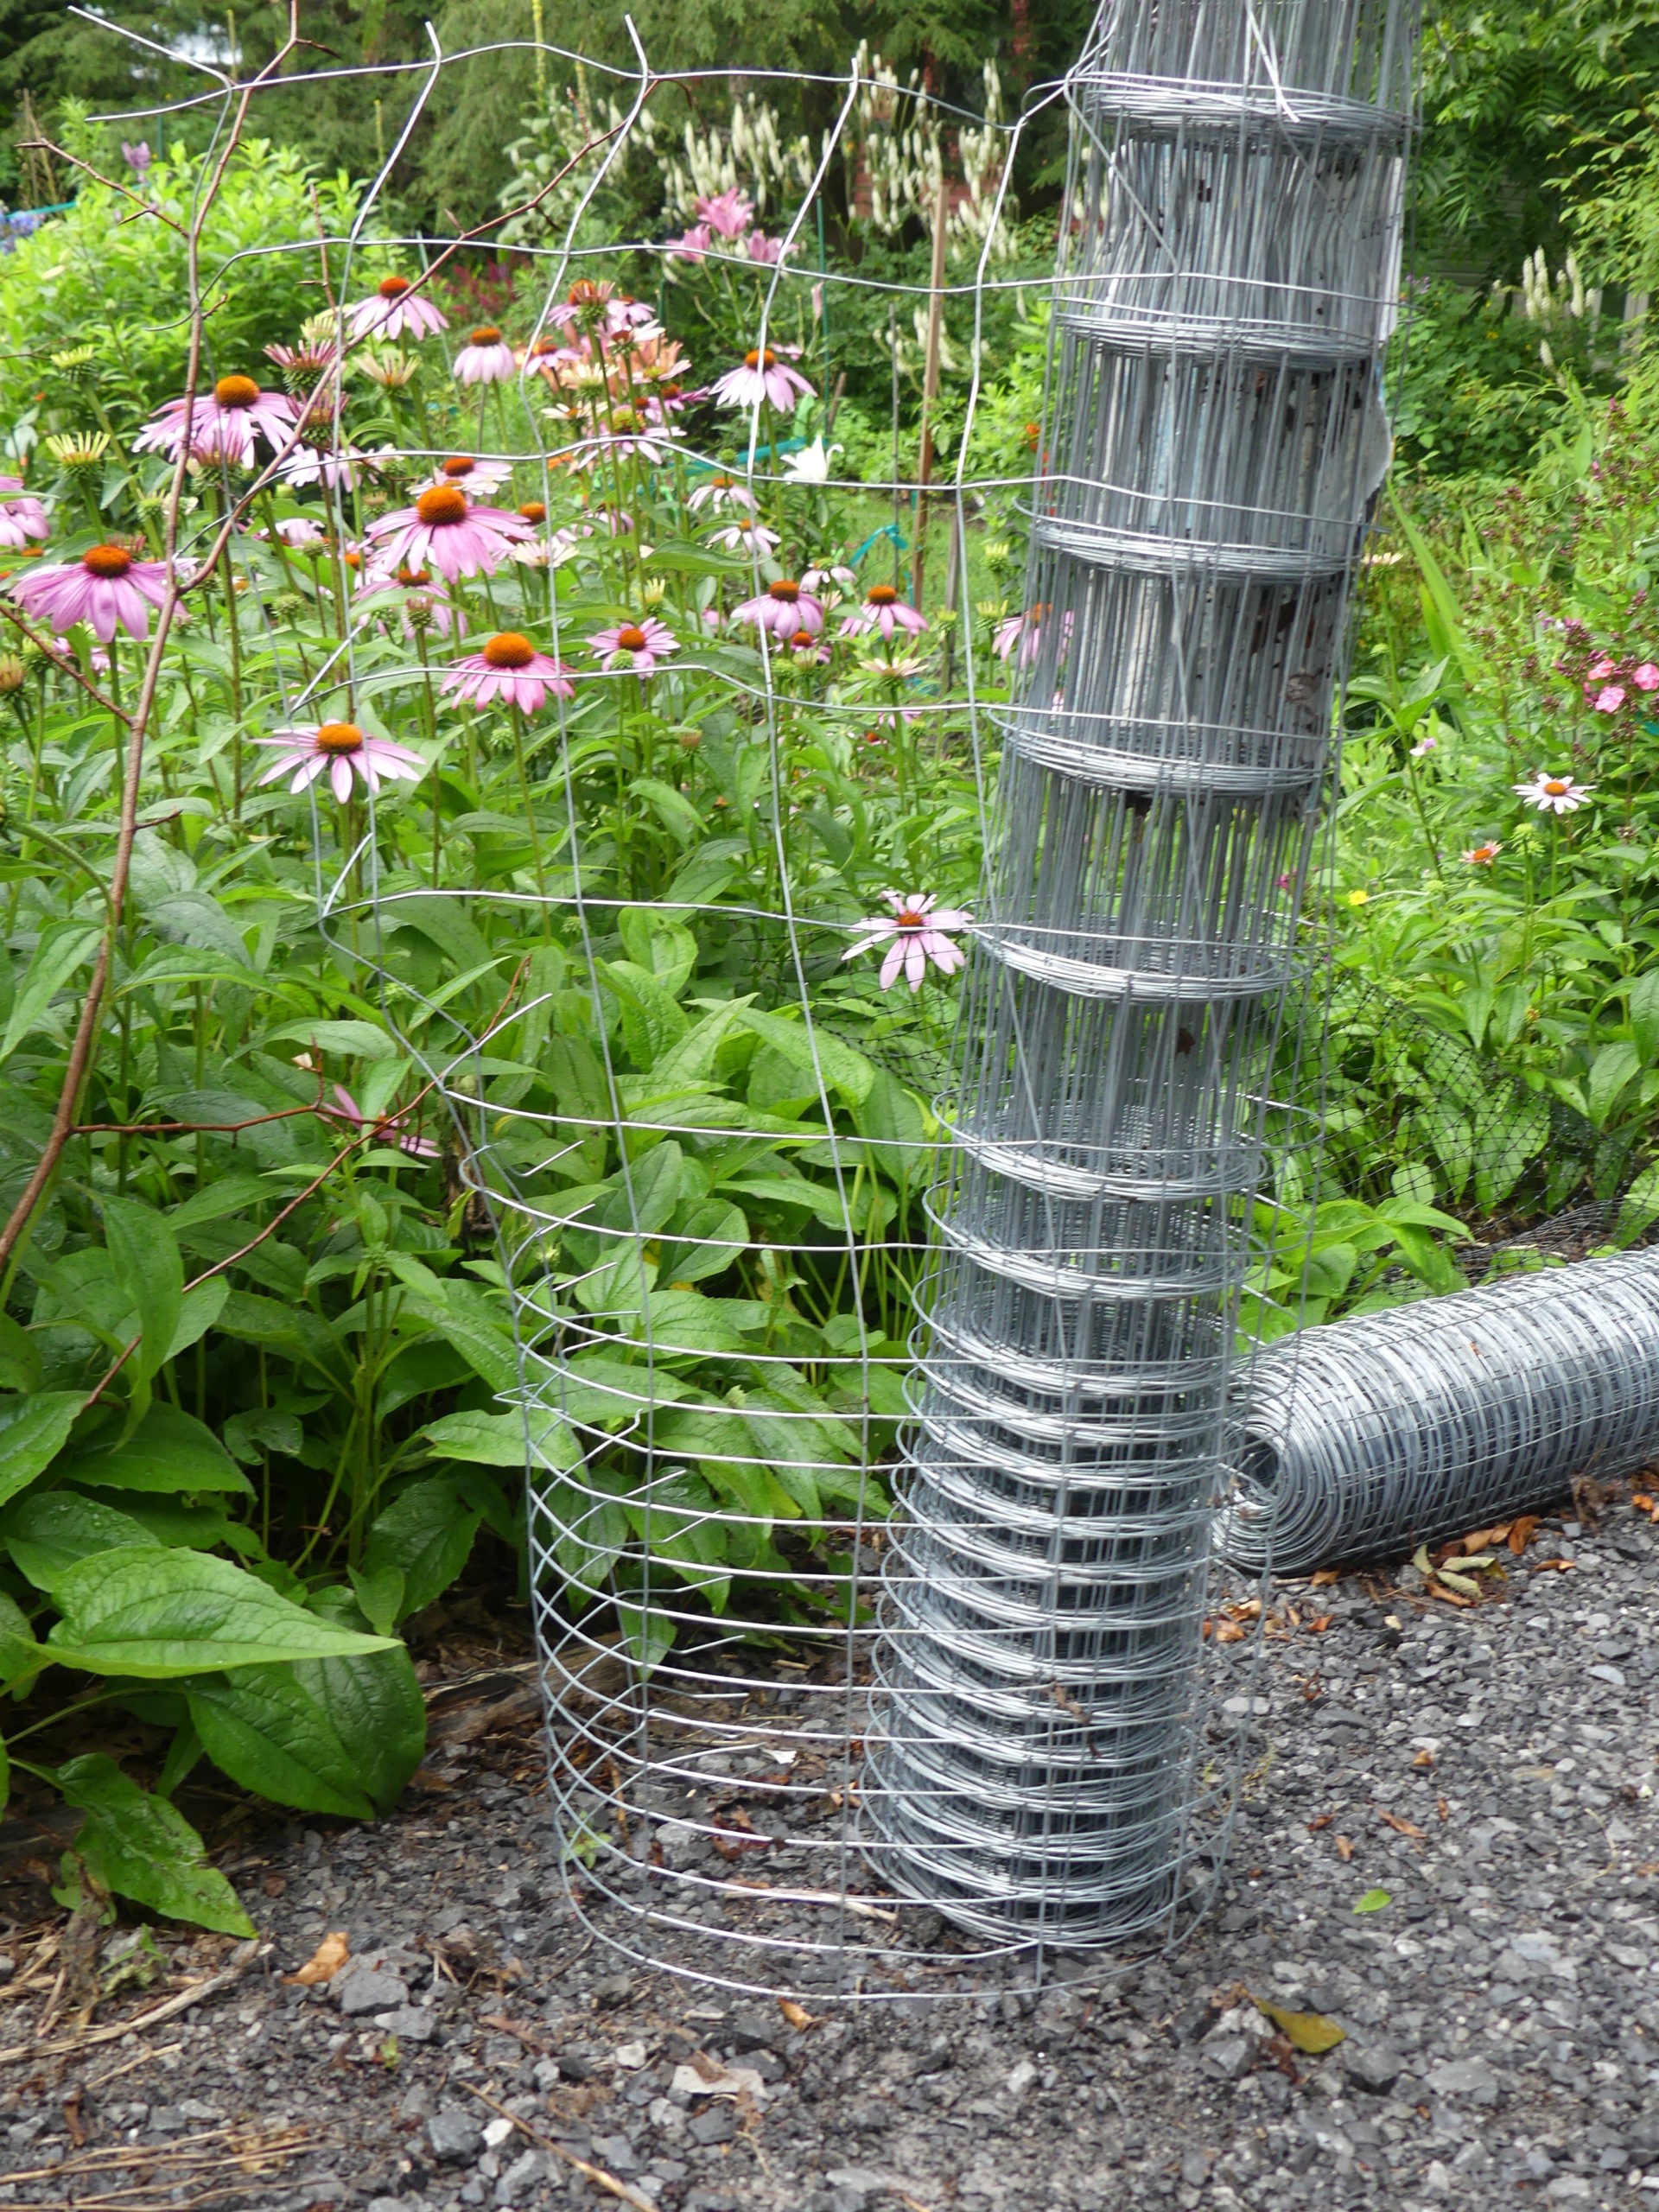 This is 40-inch-high, galvanized rabbit fencing. Note the grid pattern on the bottom is smaller than at the top. When properly installed it’s a fool-proof method of keeping rabbits out of the vegetable garden.